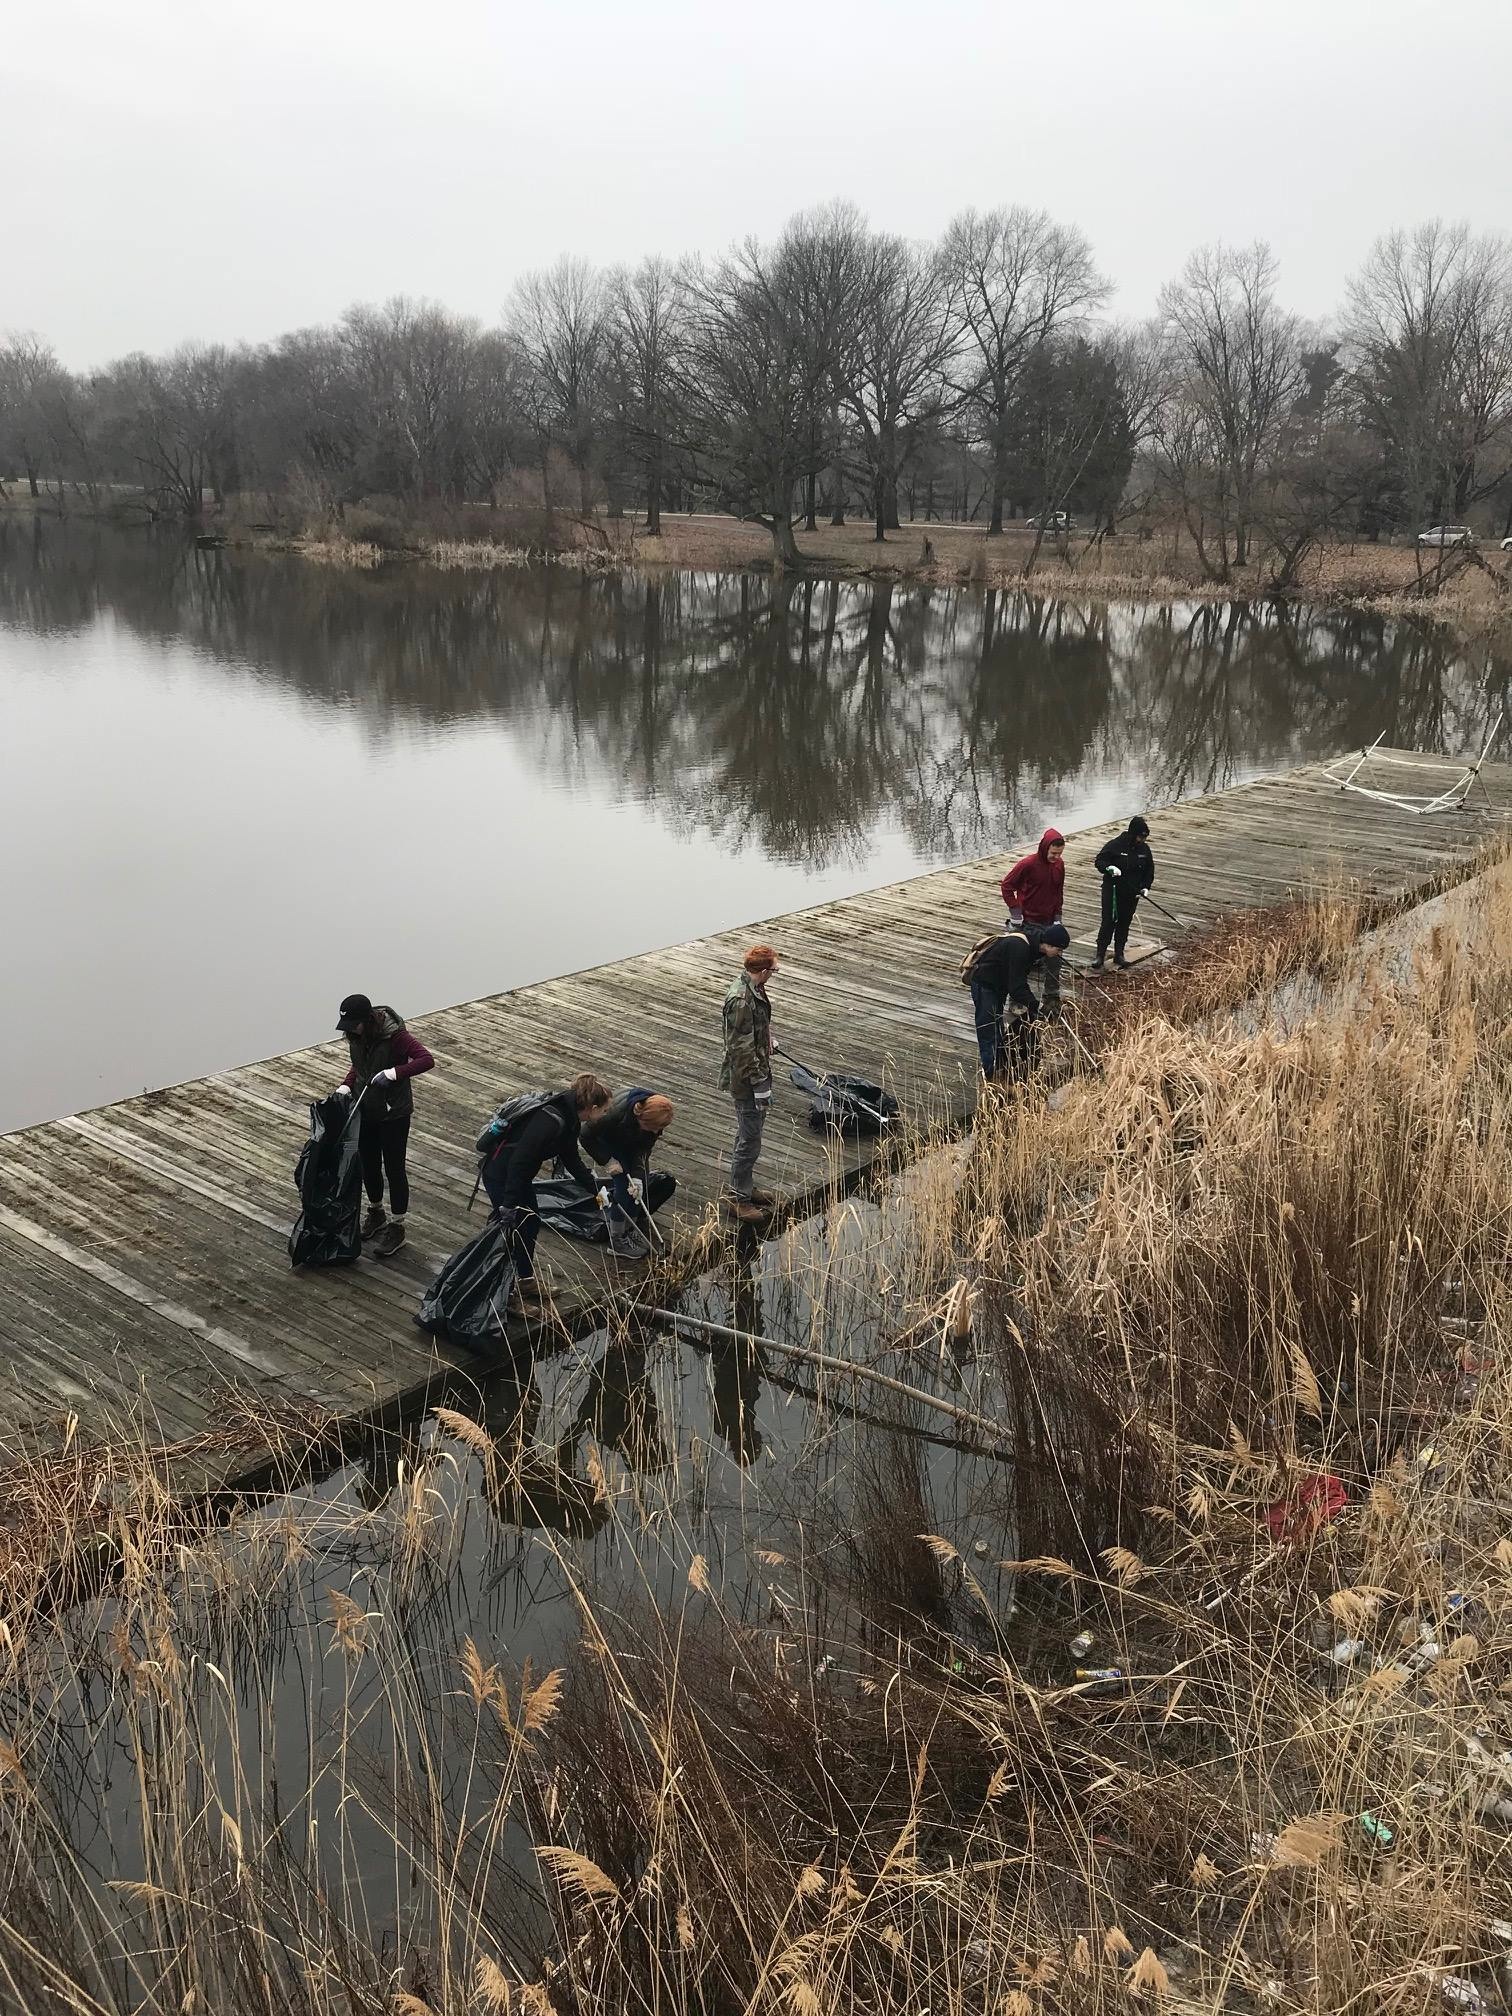 Volunteers clean up one of the lakes at FDR Park on a cold February day. (Photo credit: Friends of FDR Park/Facebook)